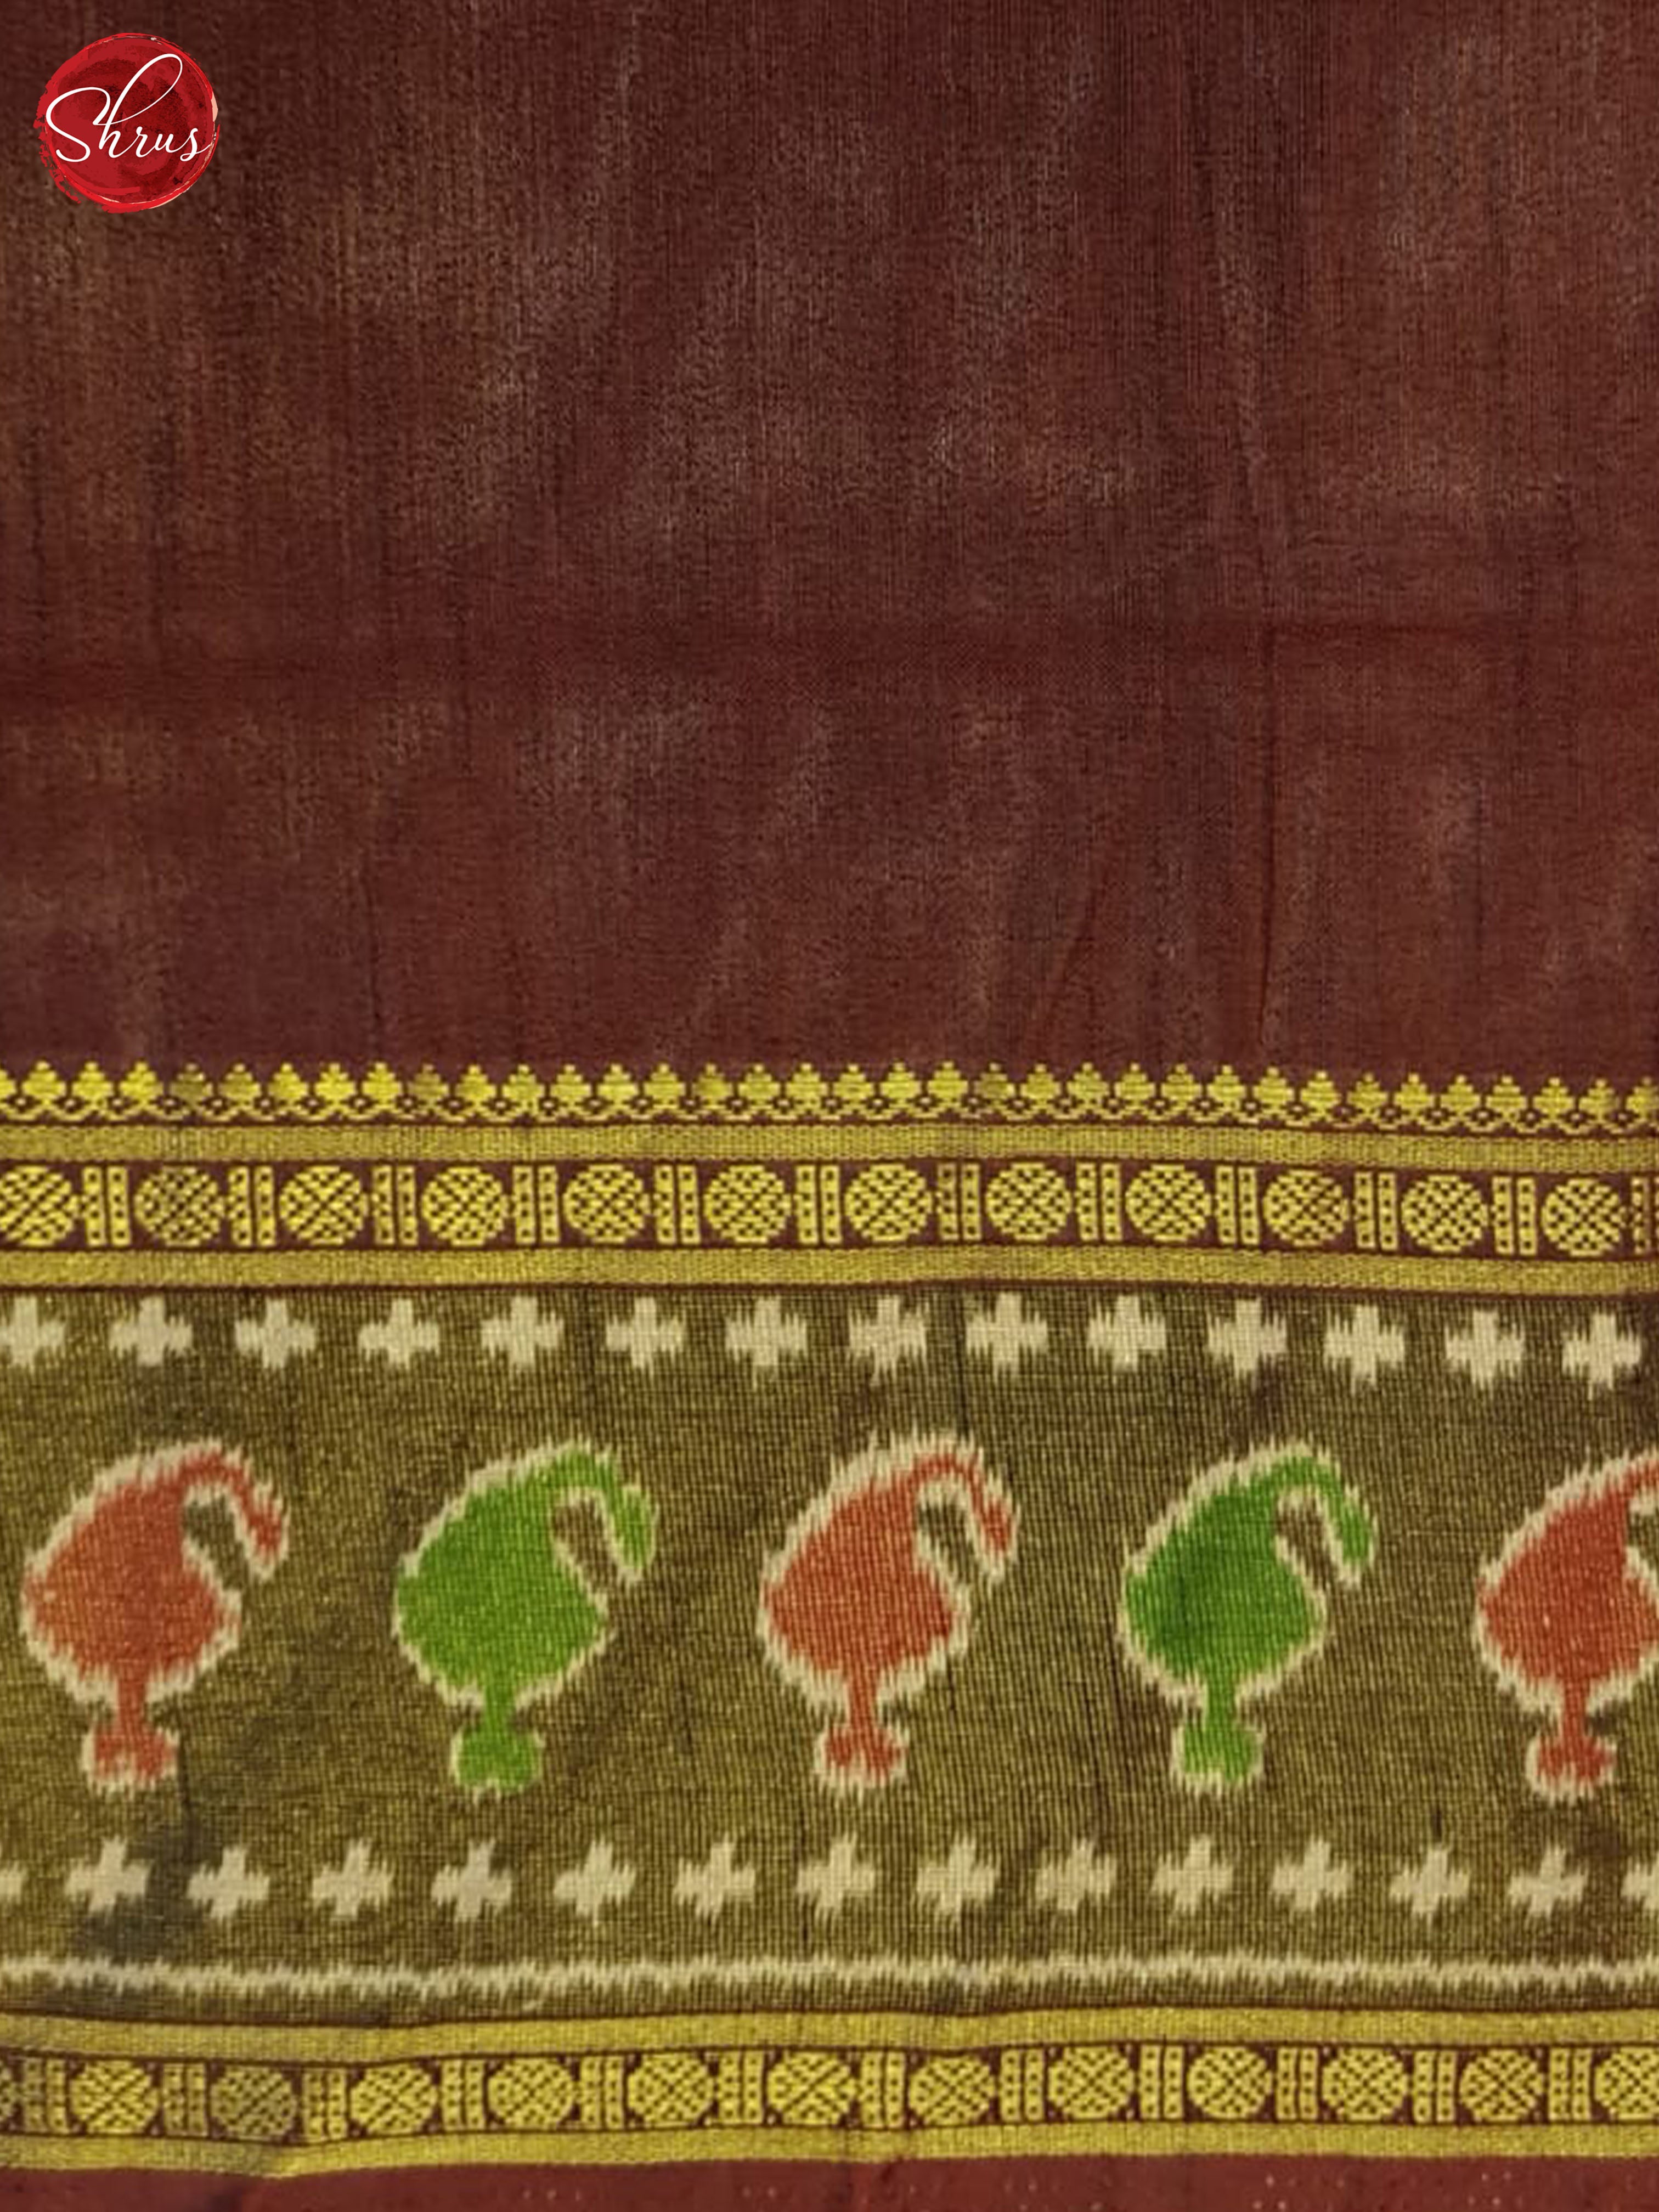 Red And Brown- Semi Patola Saree - Shop on ShrusEternity.com